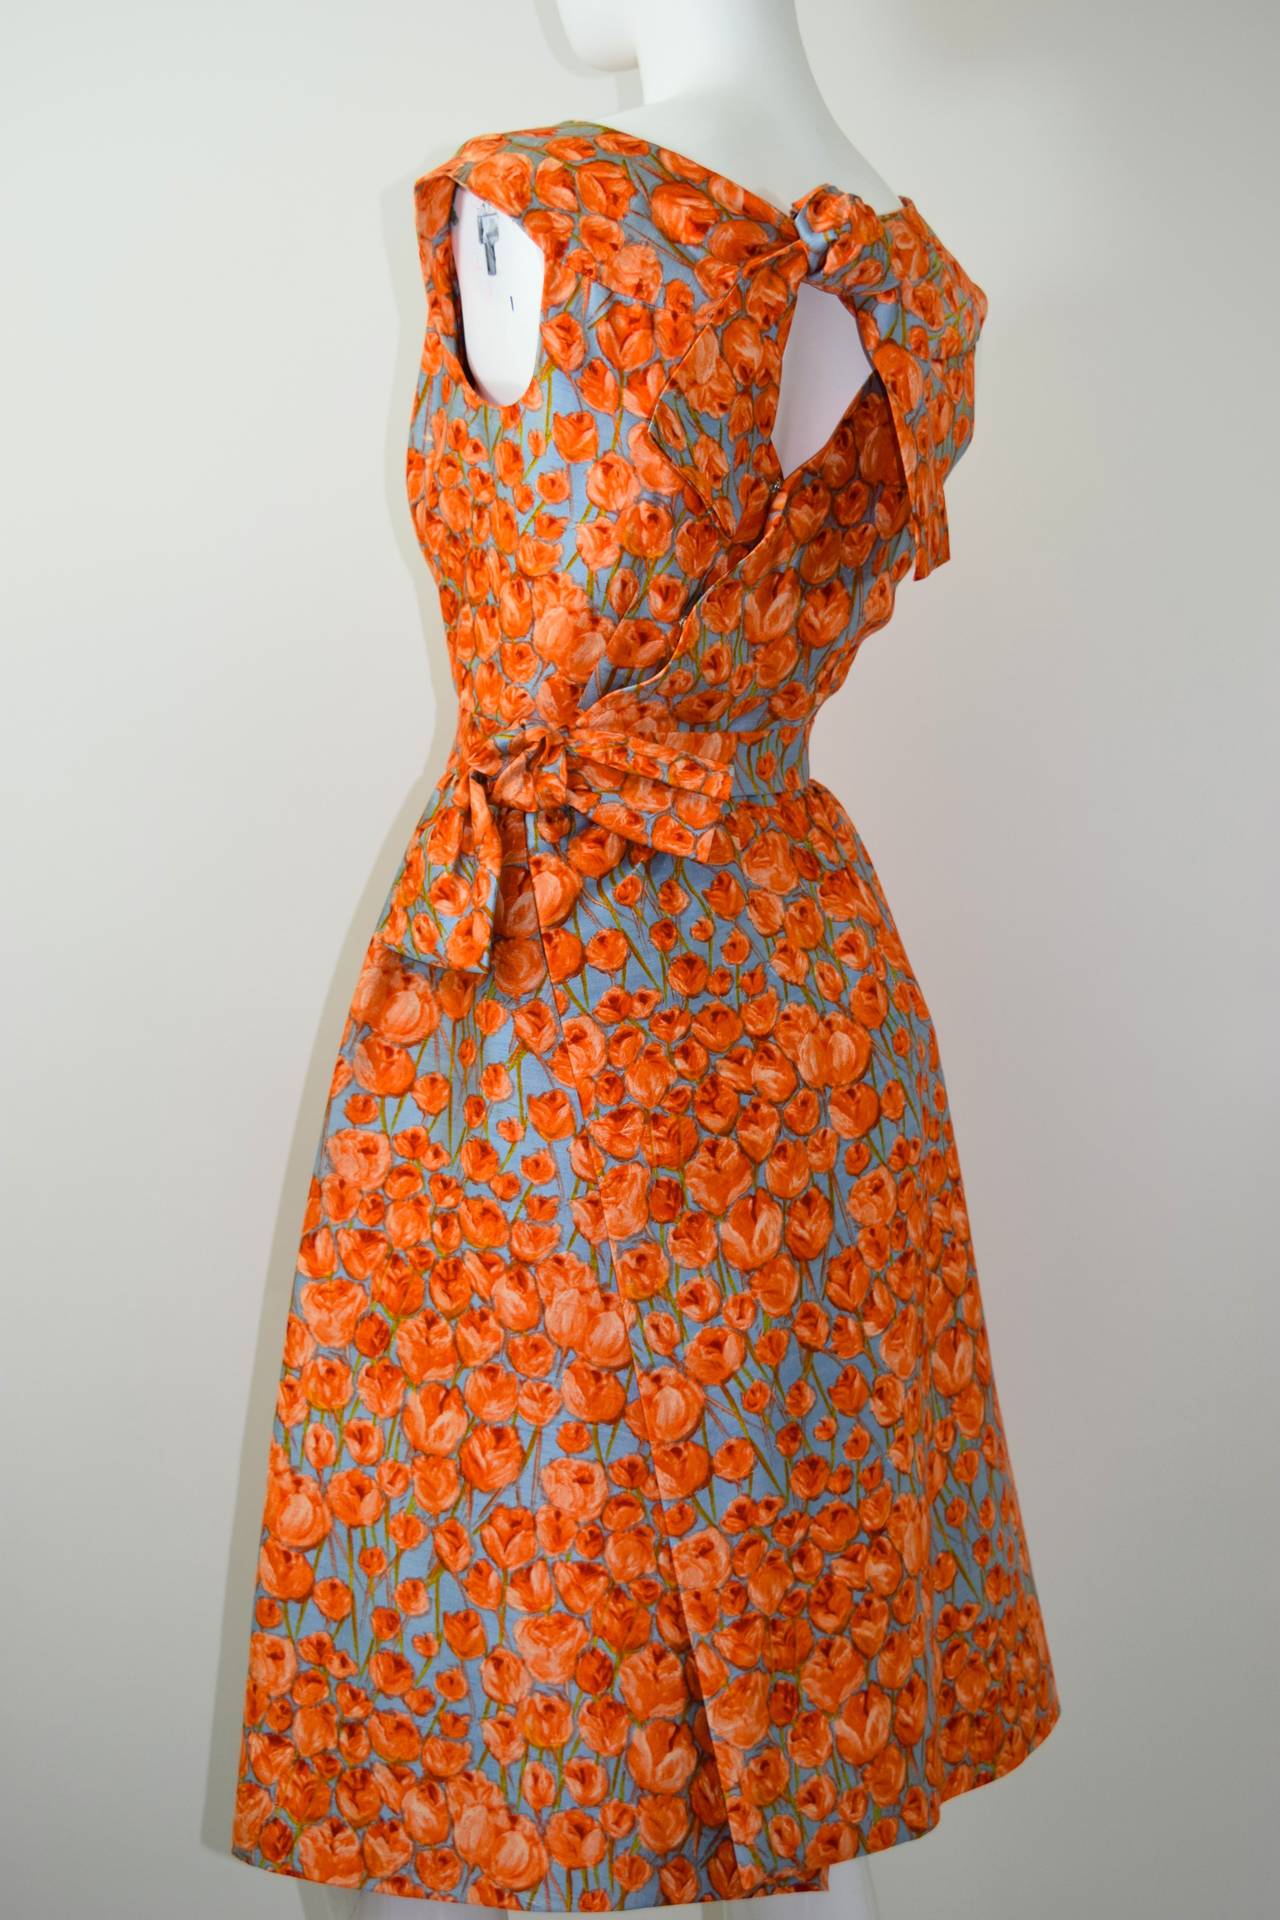 This Hattie is a beauty! The orange floral painterly like print on a robins egg blue background is magical. 
The front of the dress features an inverted pleat at the bust an the skirt potion. two  beautiful bow details ; one at the back of the